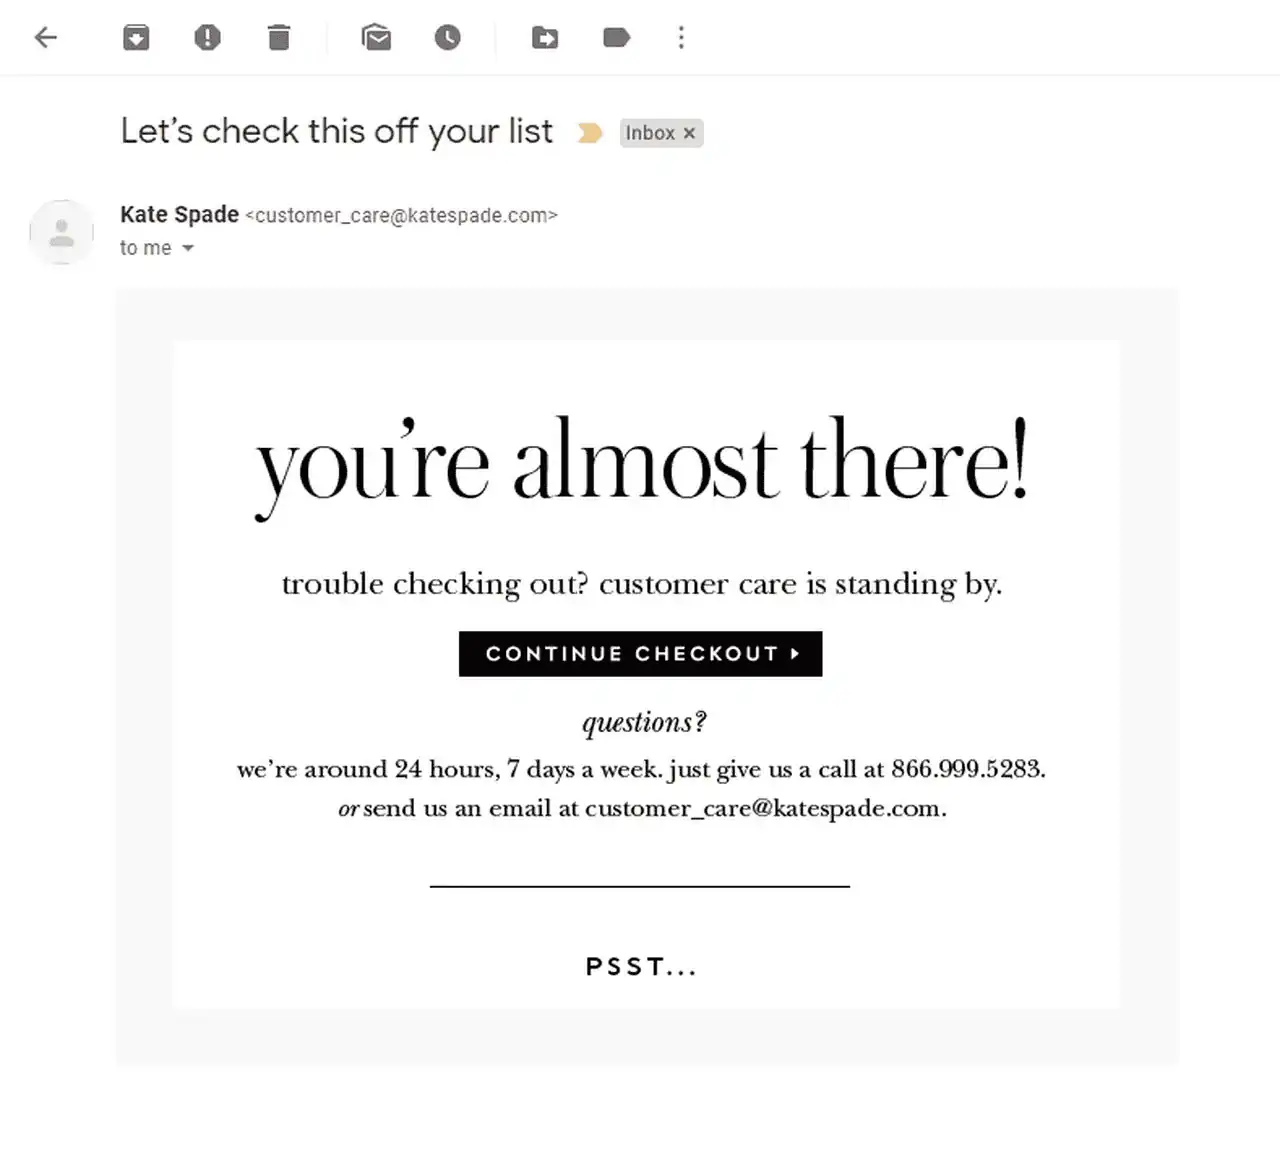 Ecommerce personalized messaging example - abandoned cart email